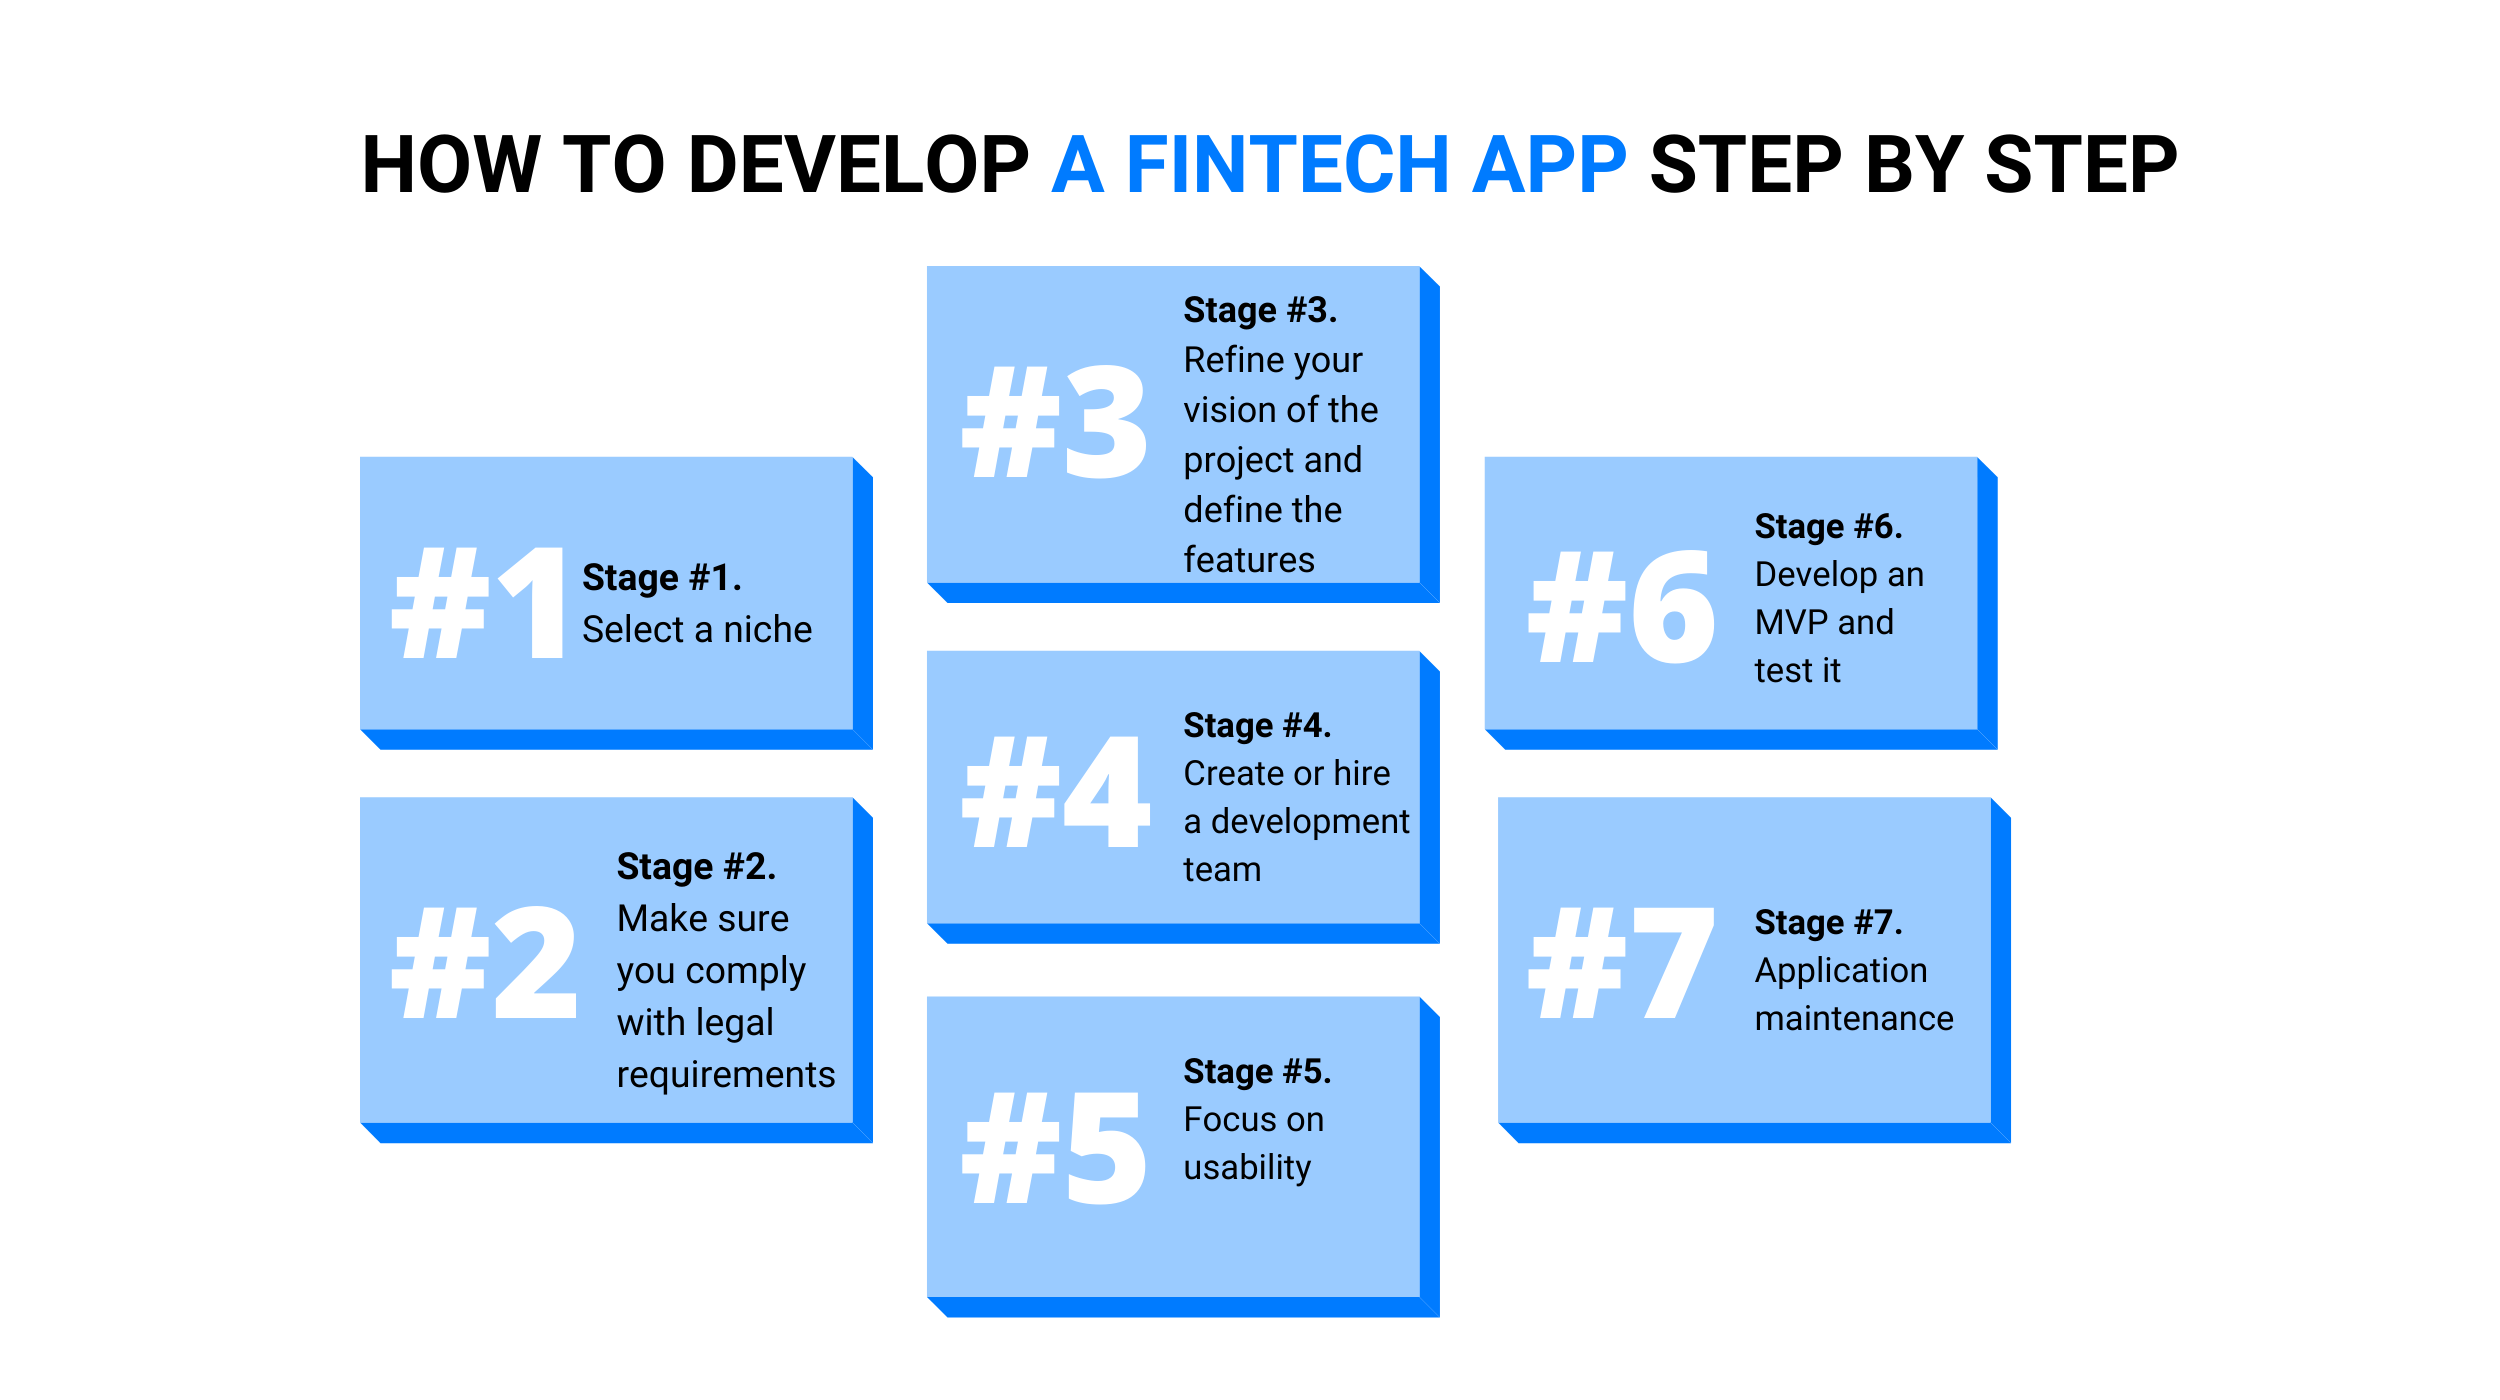 How to Develop a Fintech App Step by Step (2)